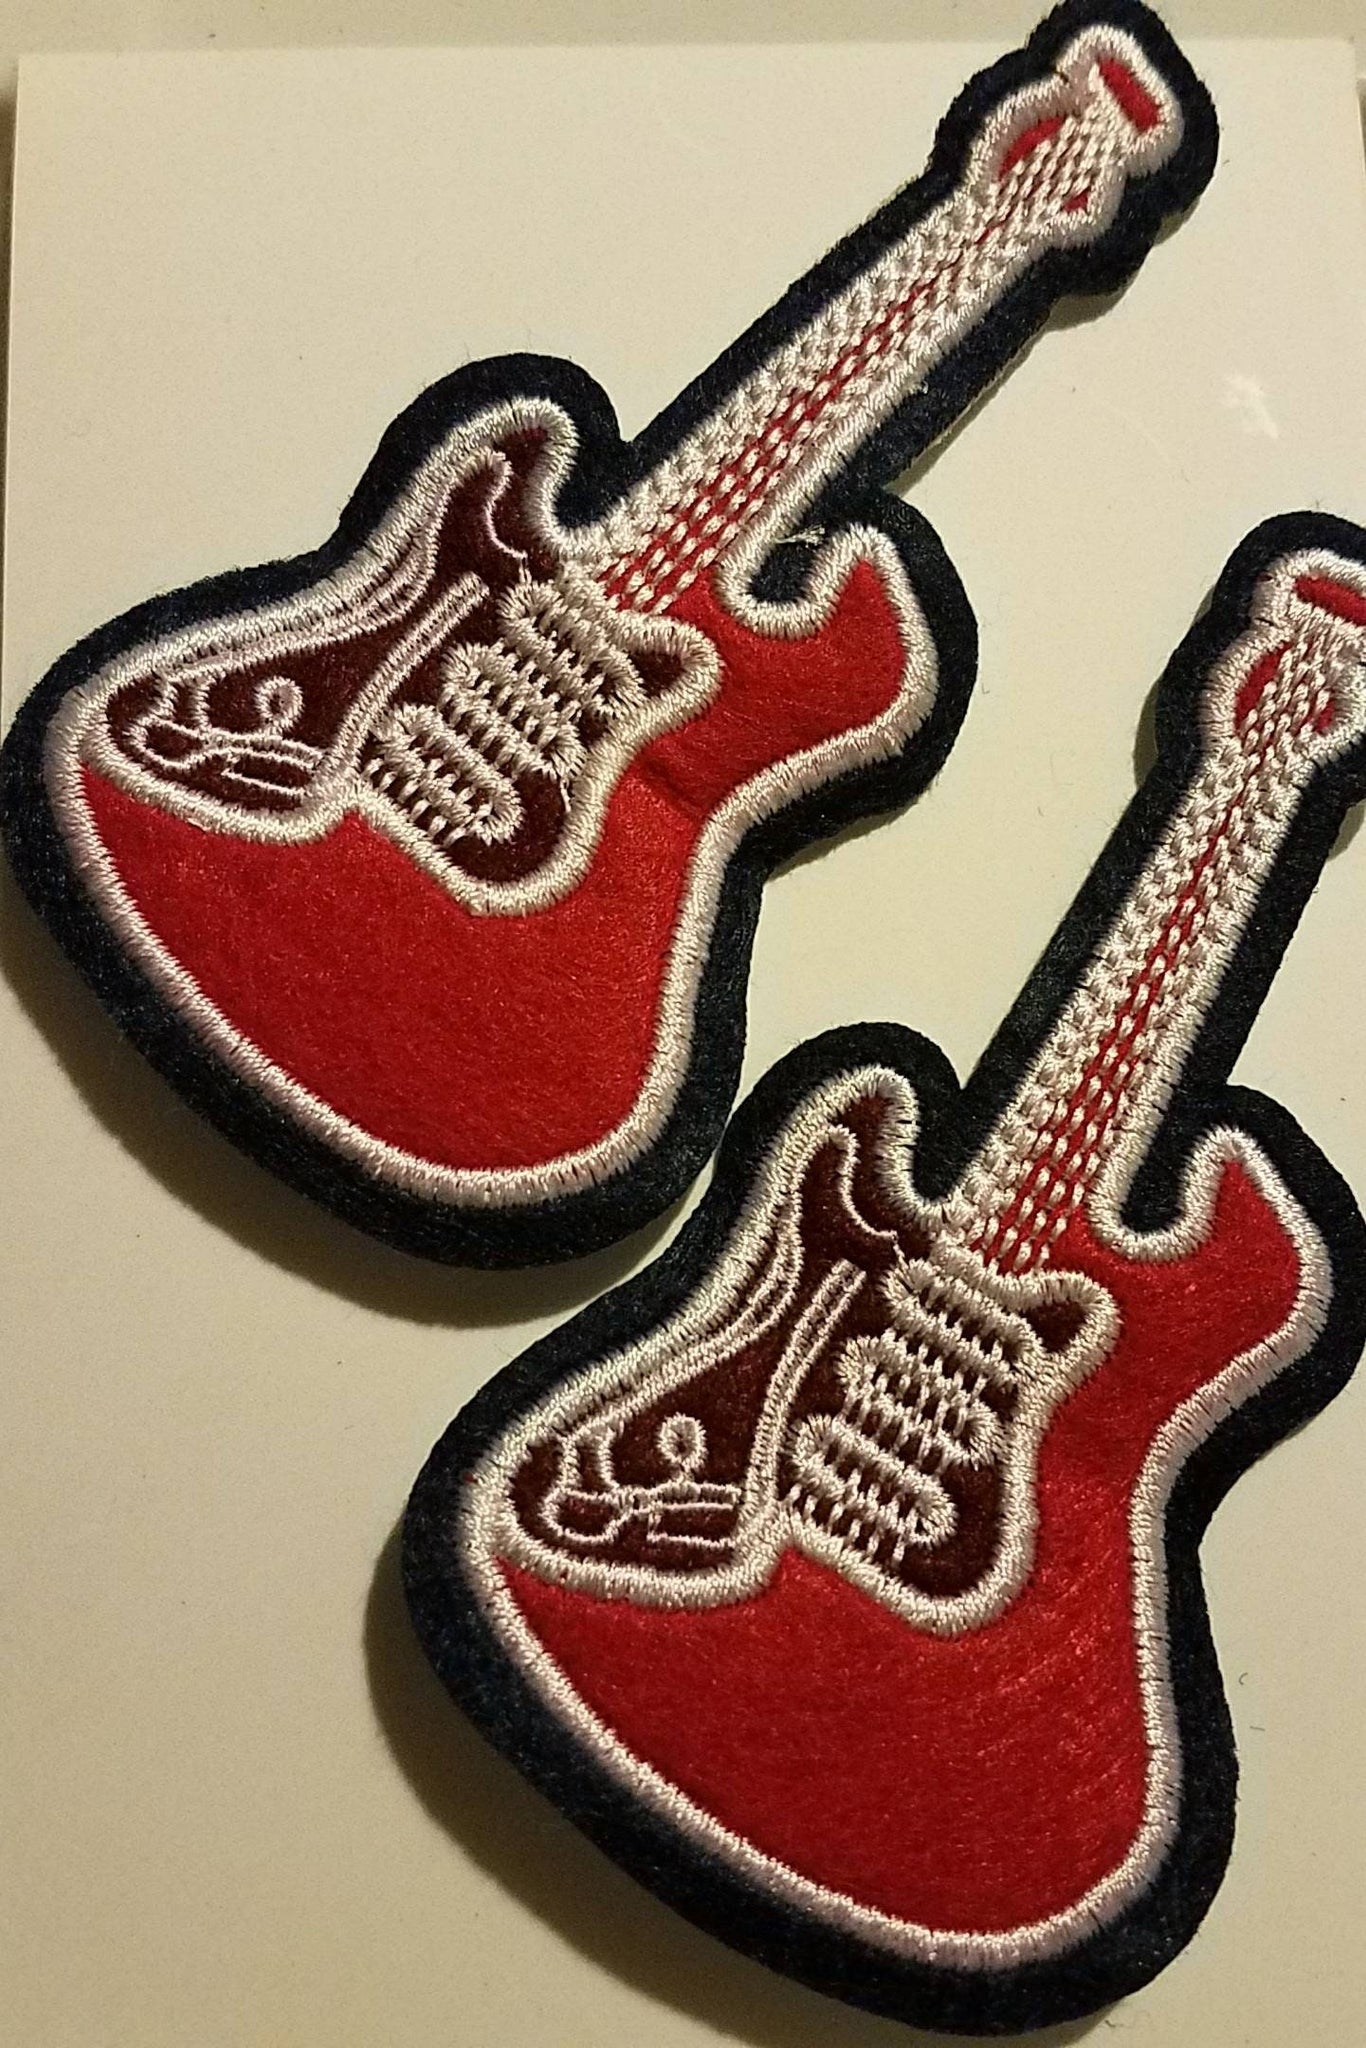 Cool 2pc/set, Gold Metallic QUEEN patches, DIY, Embroidered